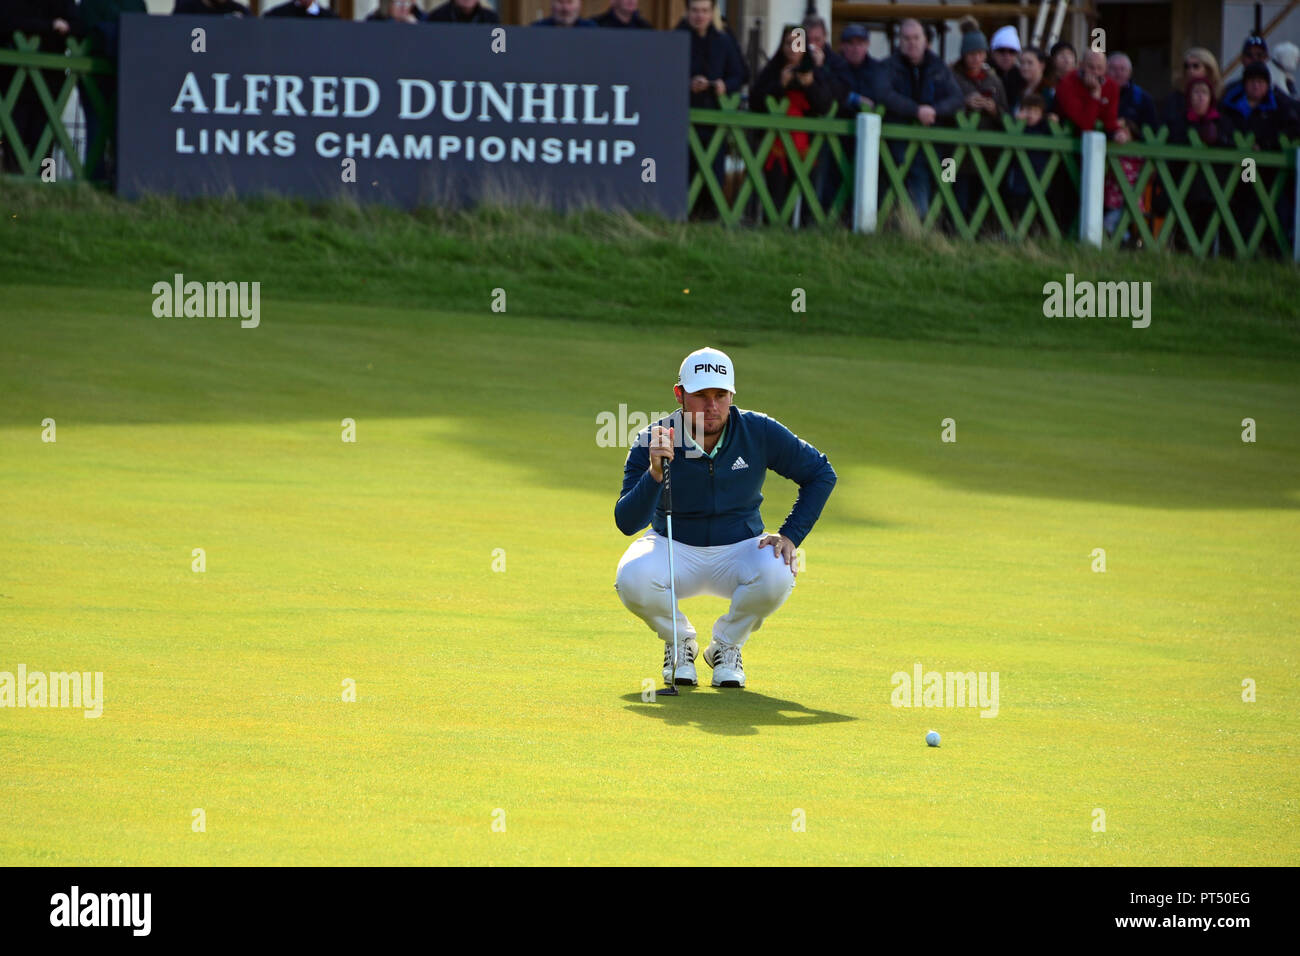 St Andrews, Scotland, United Kingdom, 06, October, 2018. Tyrell Hatton tops the leaderboard as he waits to putt on the 18th green at the Old Course, St Andrews, on Day 3 of the Dunhill Links Championship, where he is in the running for a hat trick after winning the event in 2016 and 2017. © Ken Jack / Alamy Live News Stock Photo